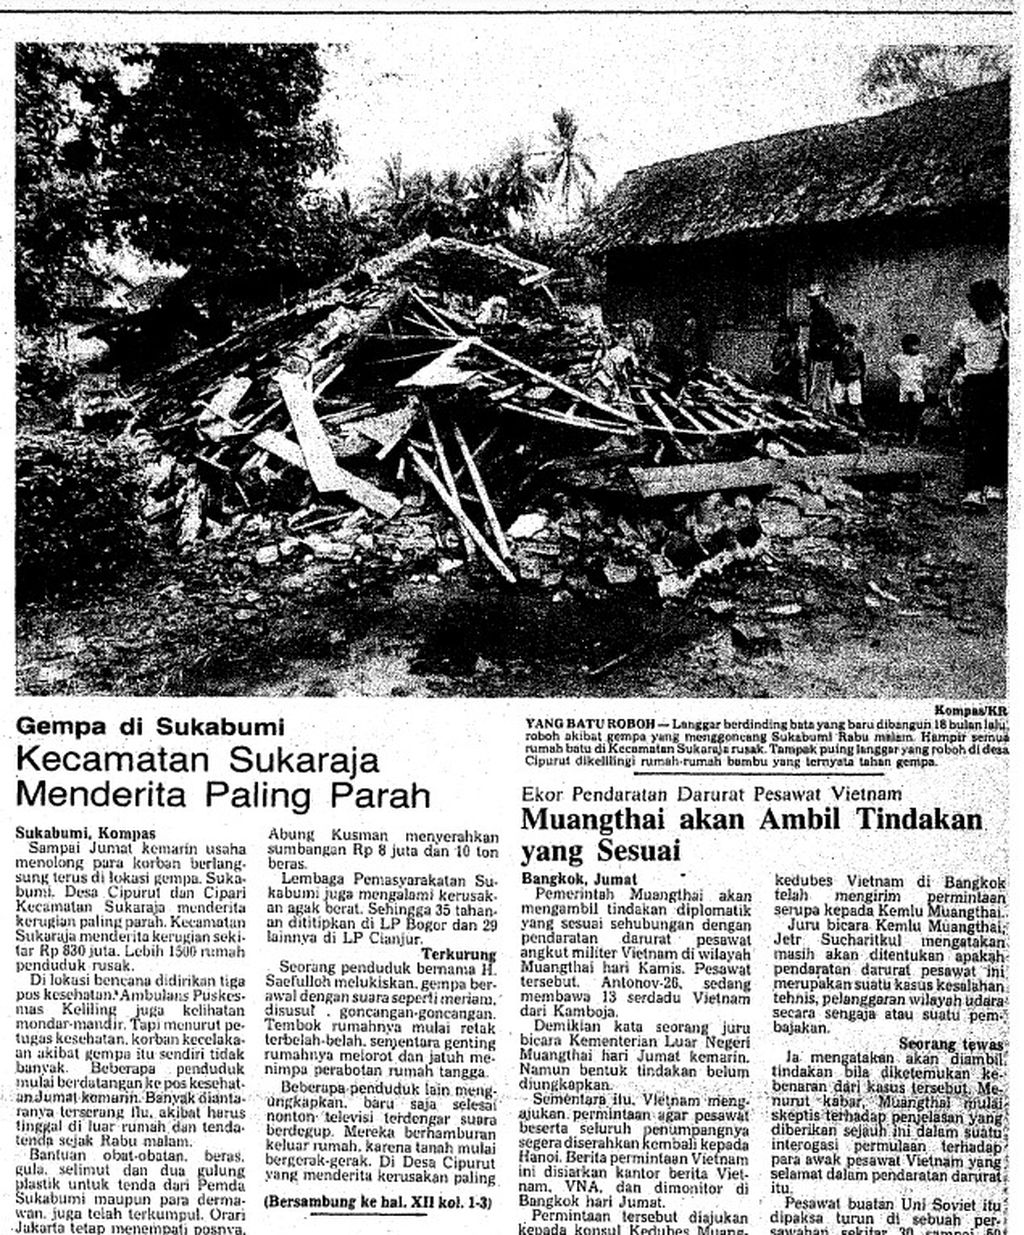  "Kompas" Daily Clipping on February 13, 1982 regarding the earthquake in Cianjur.